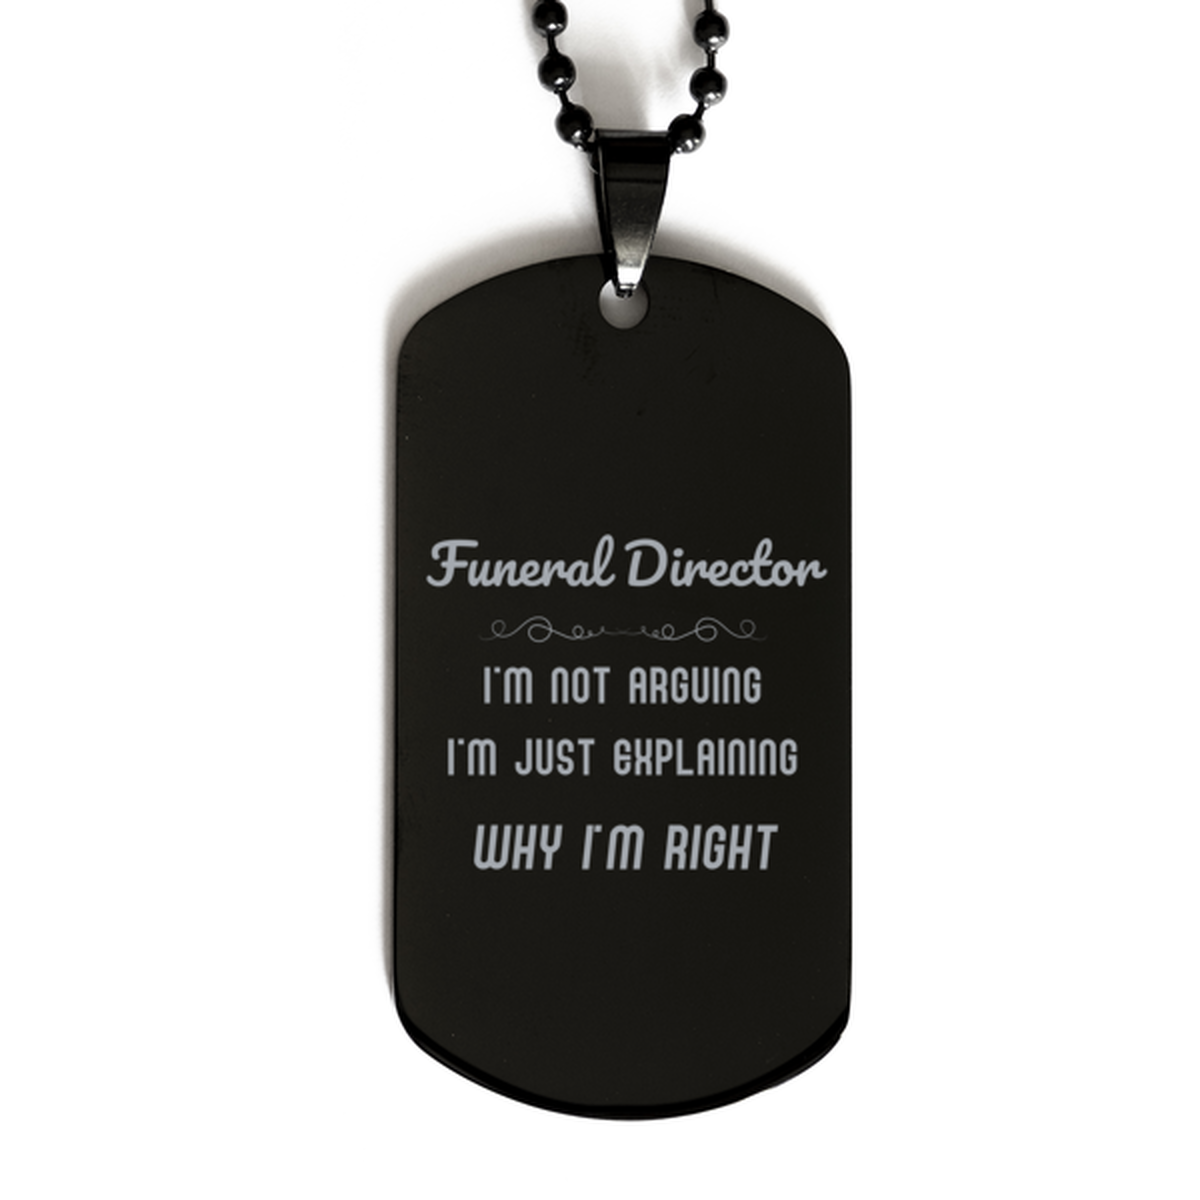 Funeral Director I'm not Arguing. I'm Just Explaining Why I'm RIGHT Black Dog Tag, Funny Saying Quote Funeral Director Gifts For Funeral Director Graduation Birthday Christmas Gifts for Men Women Coworker